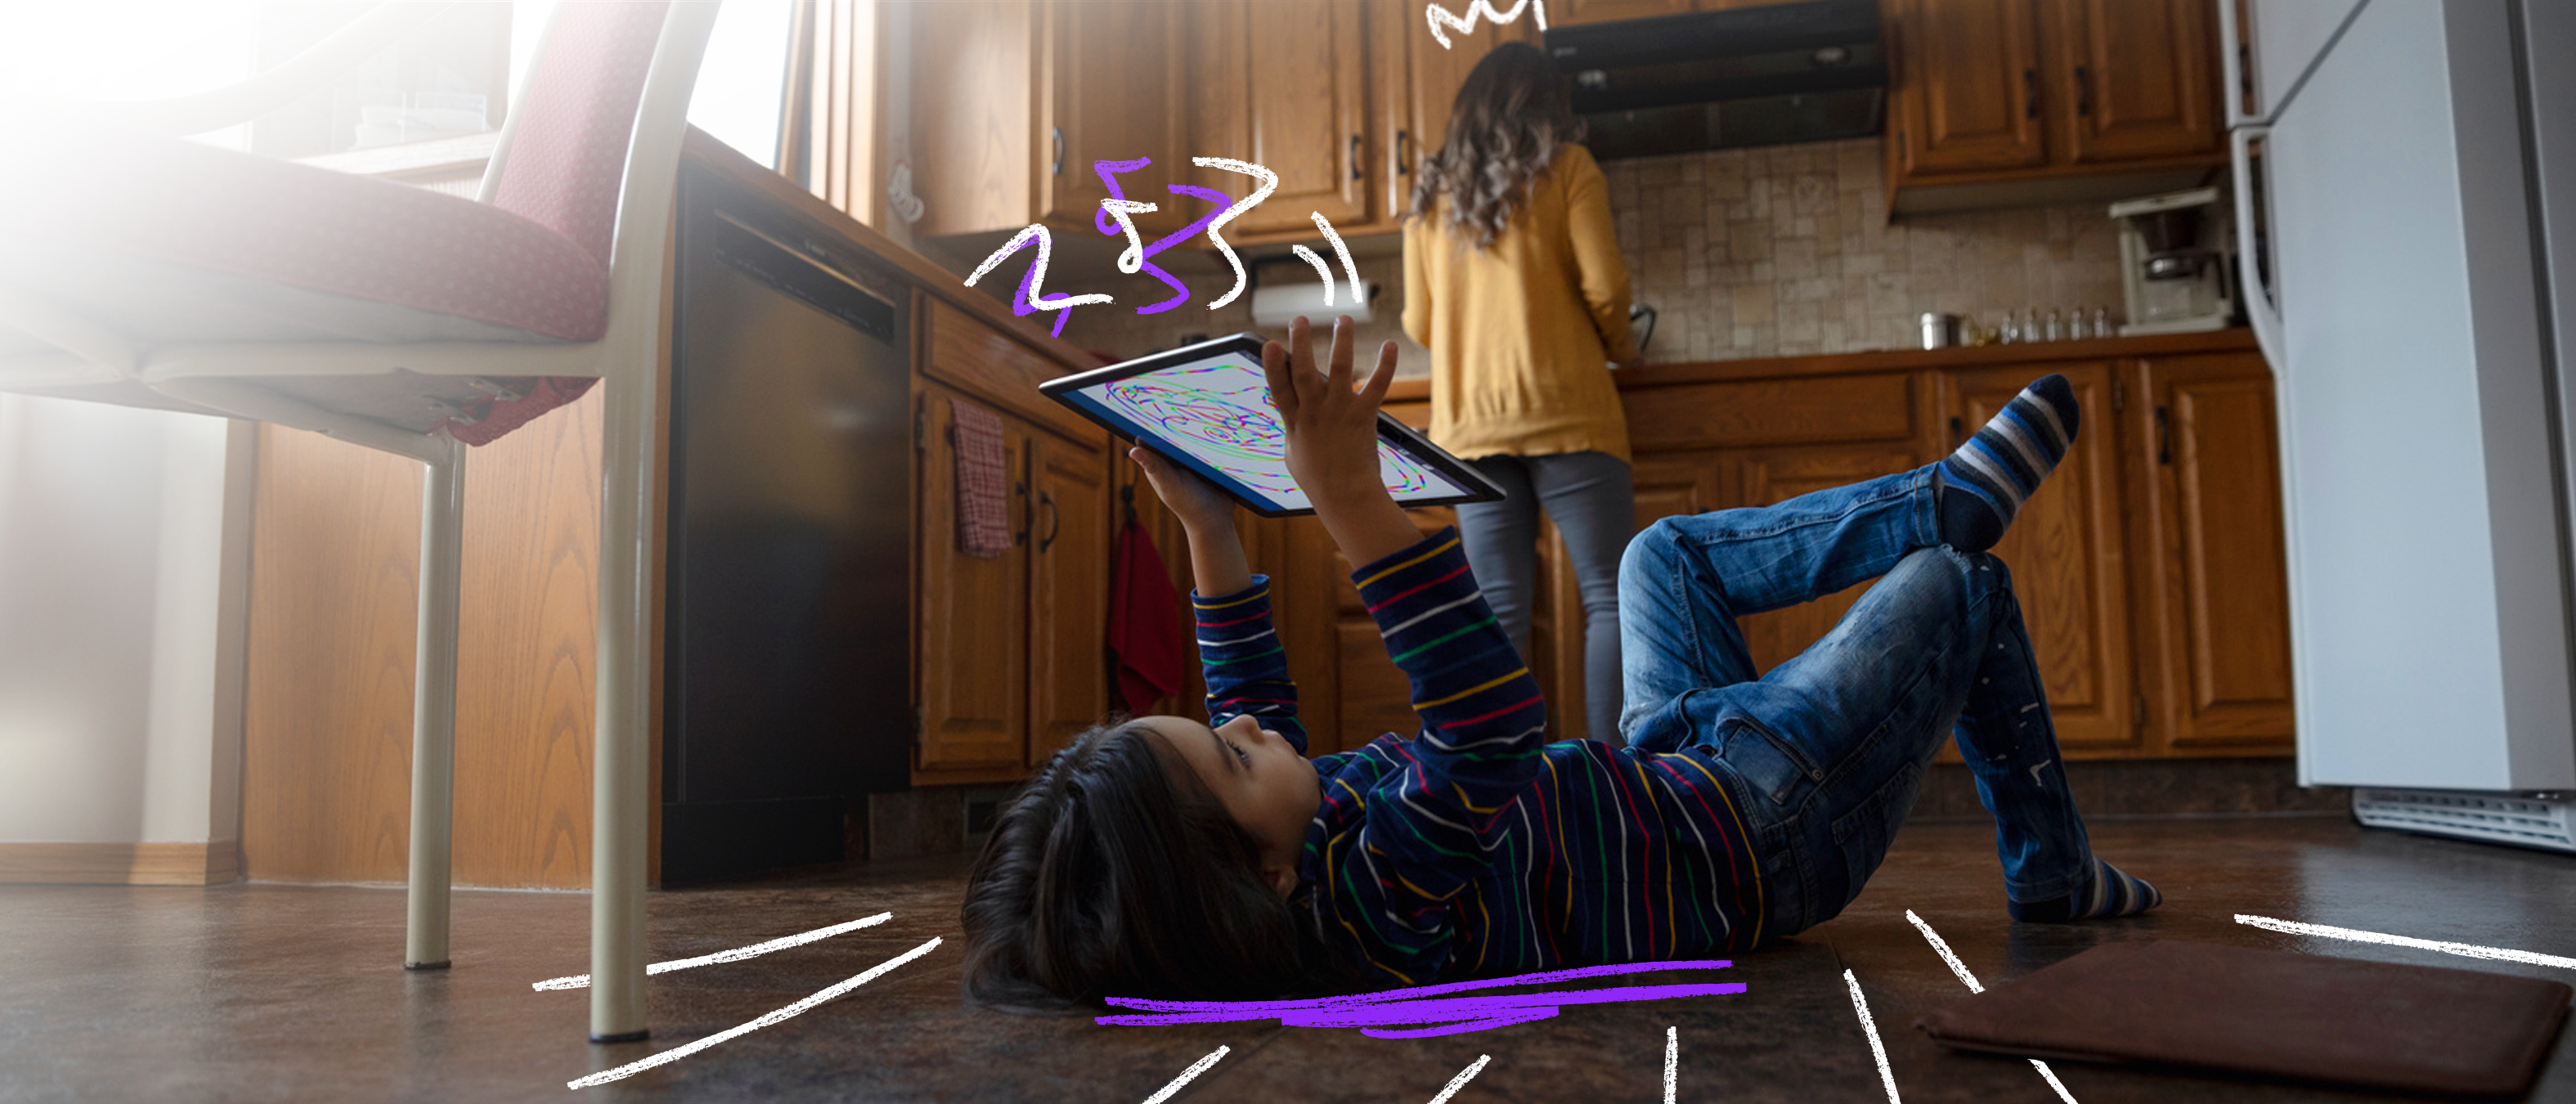 A child plays with a device on the floor in the kitchen